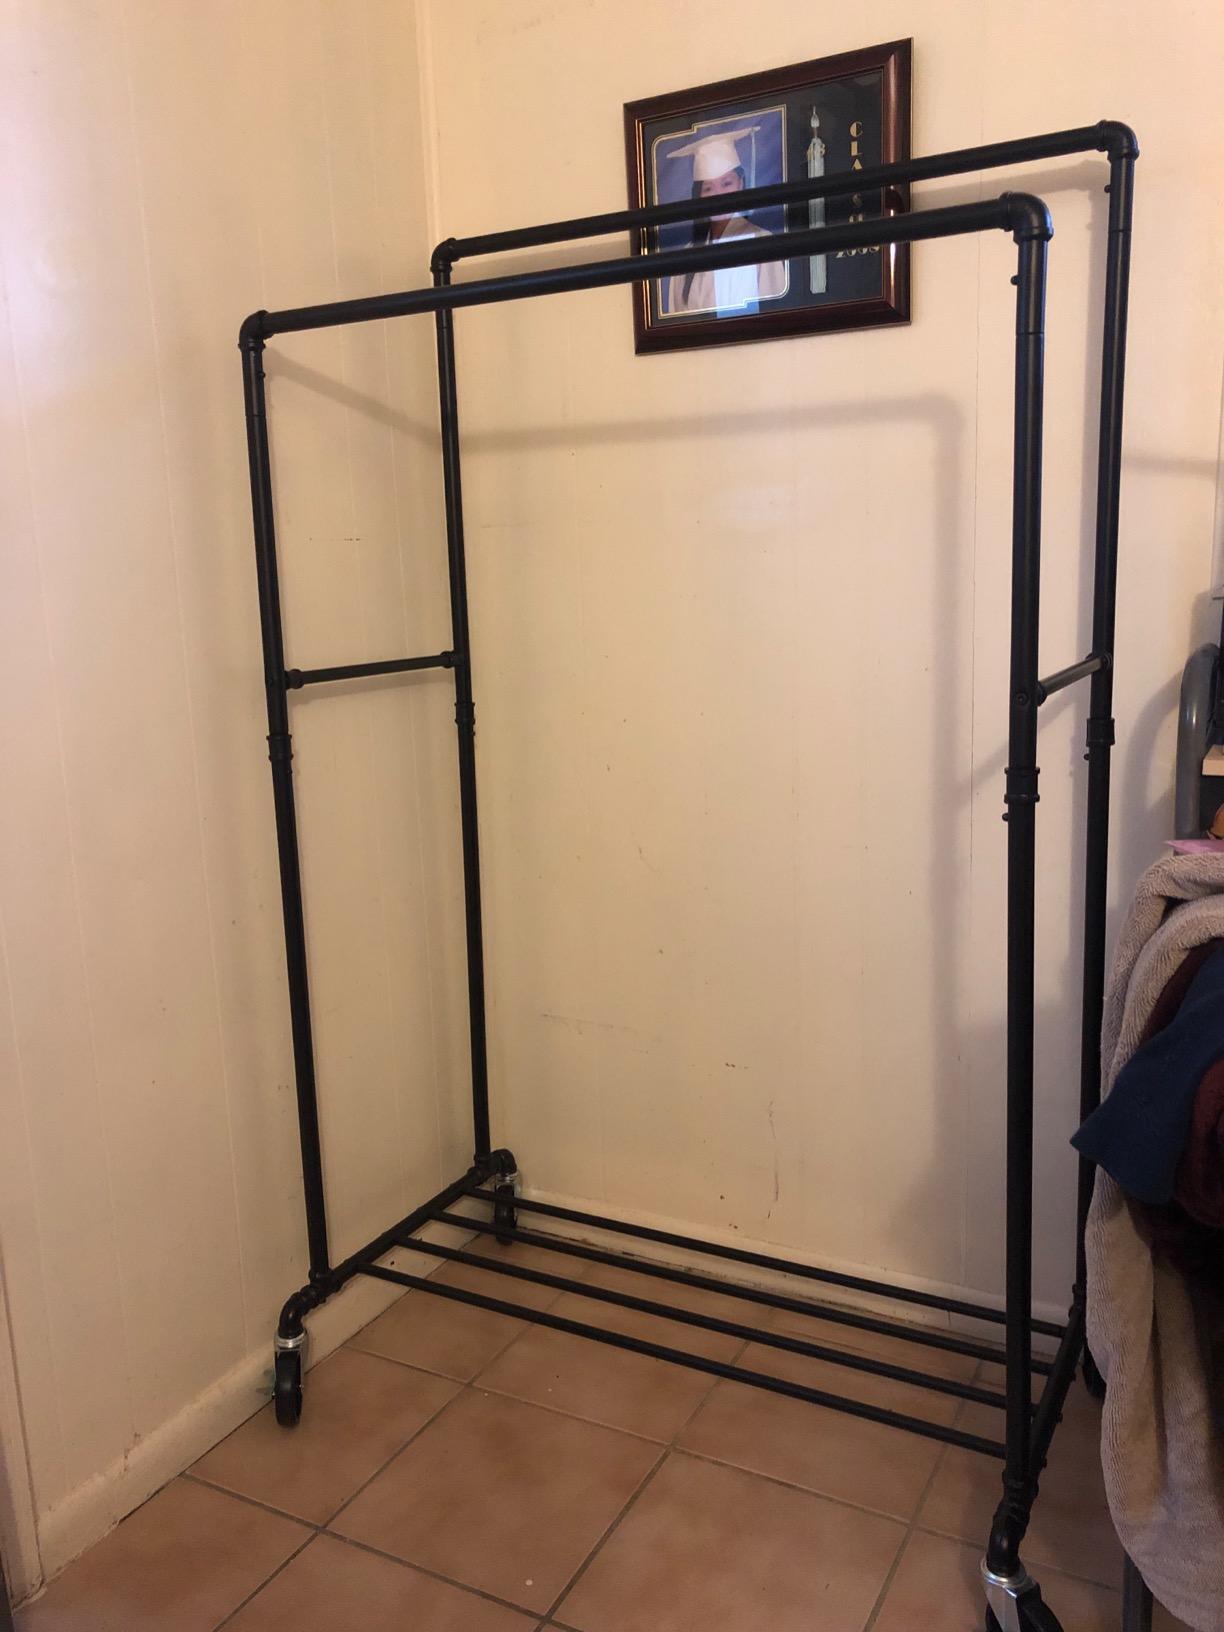 Black Clothes Rack on Wheels with 2 Rails - HWLEXTRA